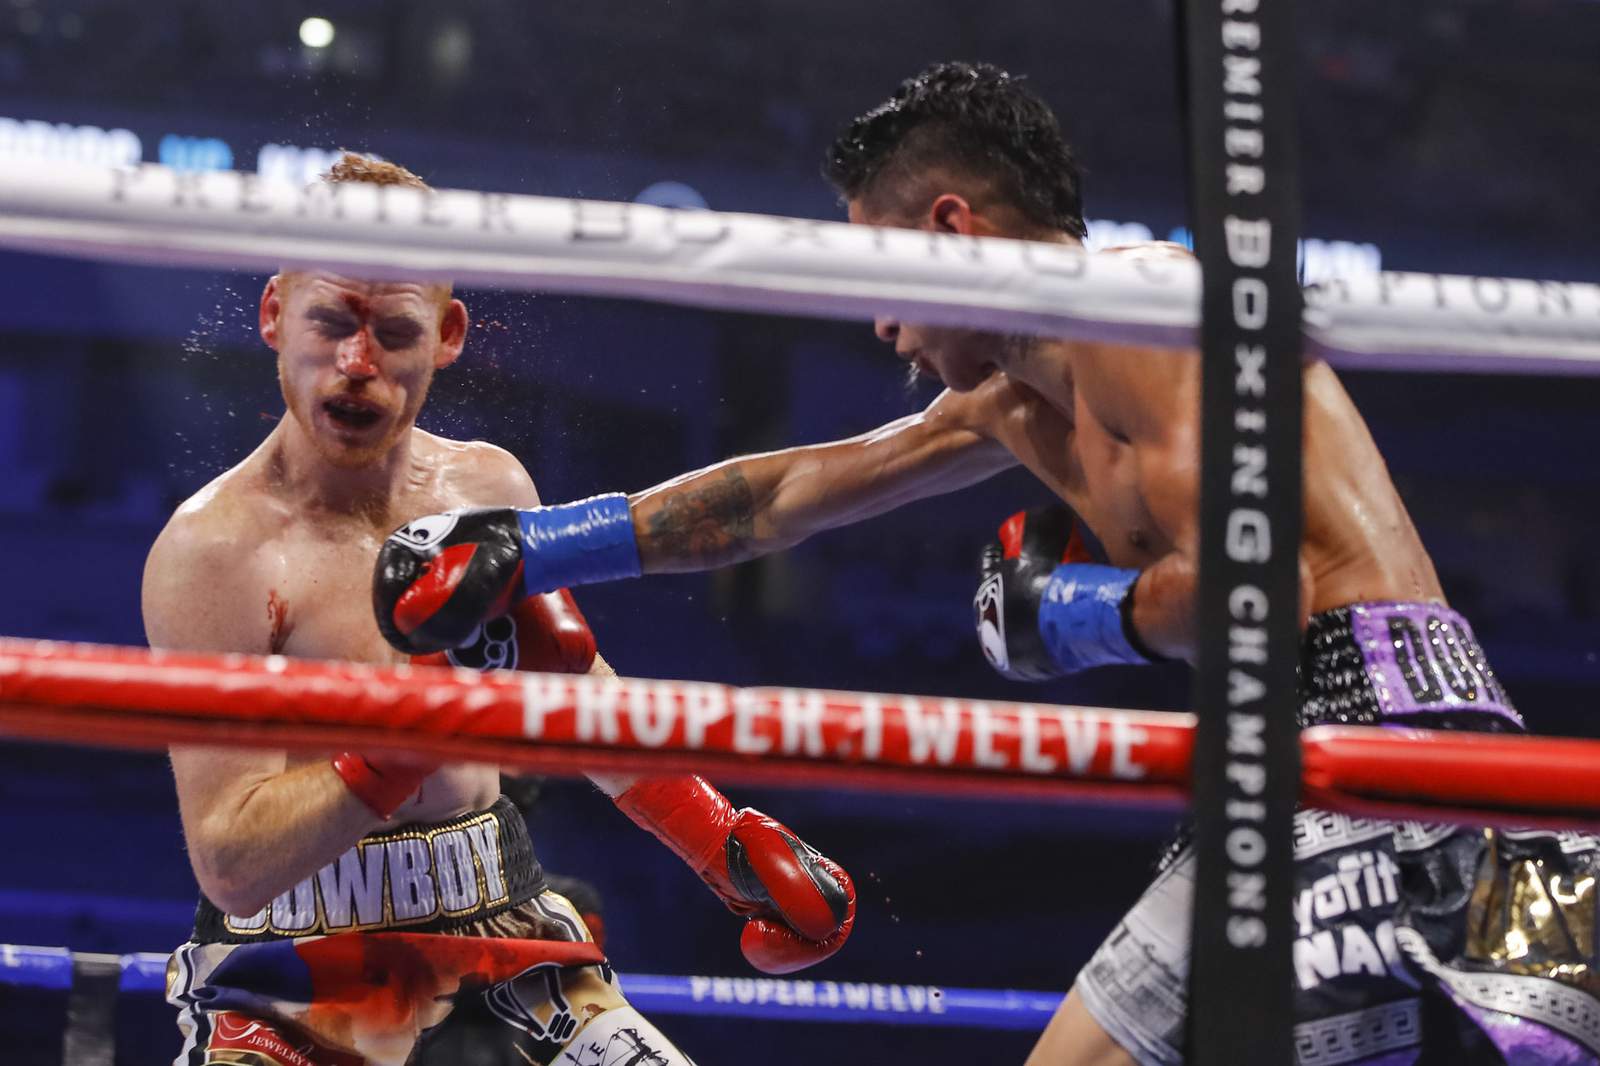 INSIDE THE RING: San Antonio’s World Champ Defends Title With KO Win